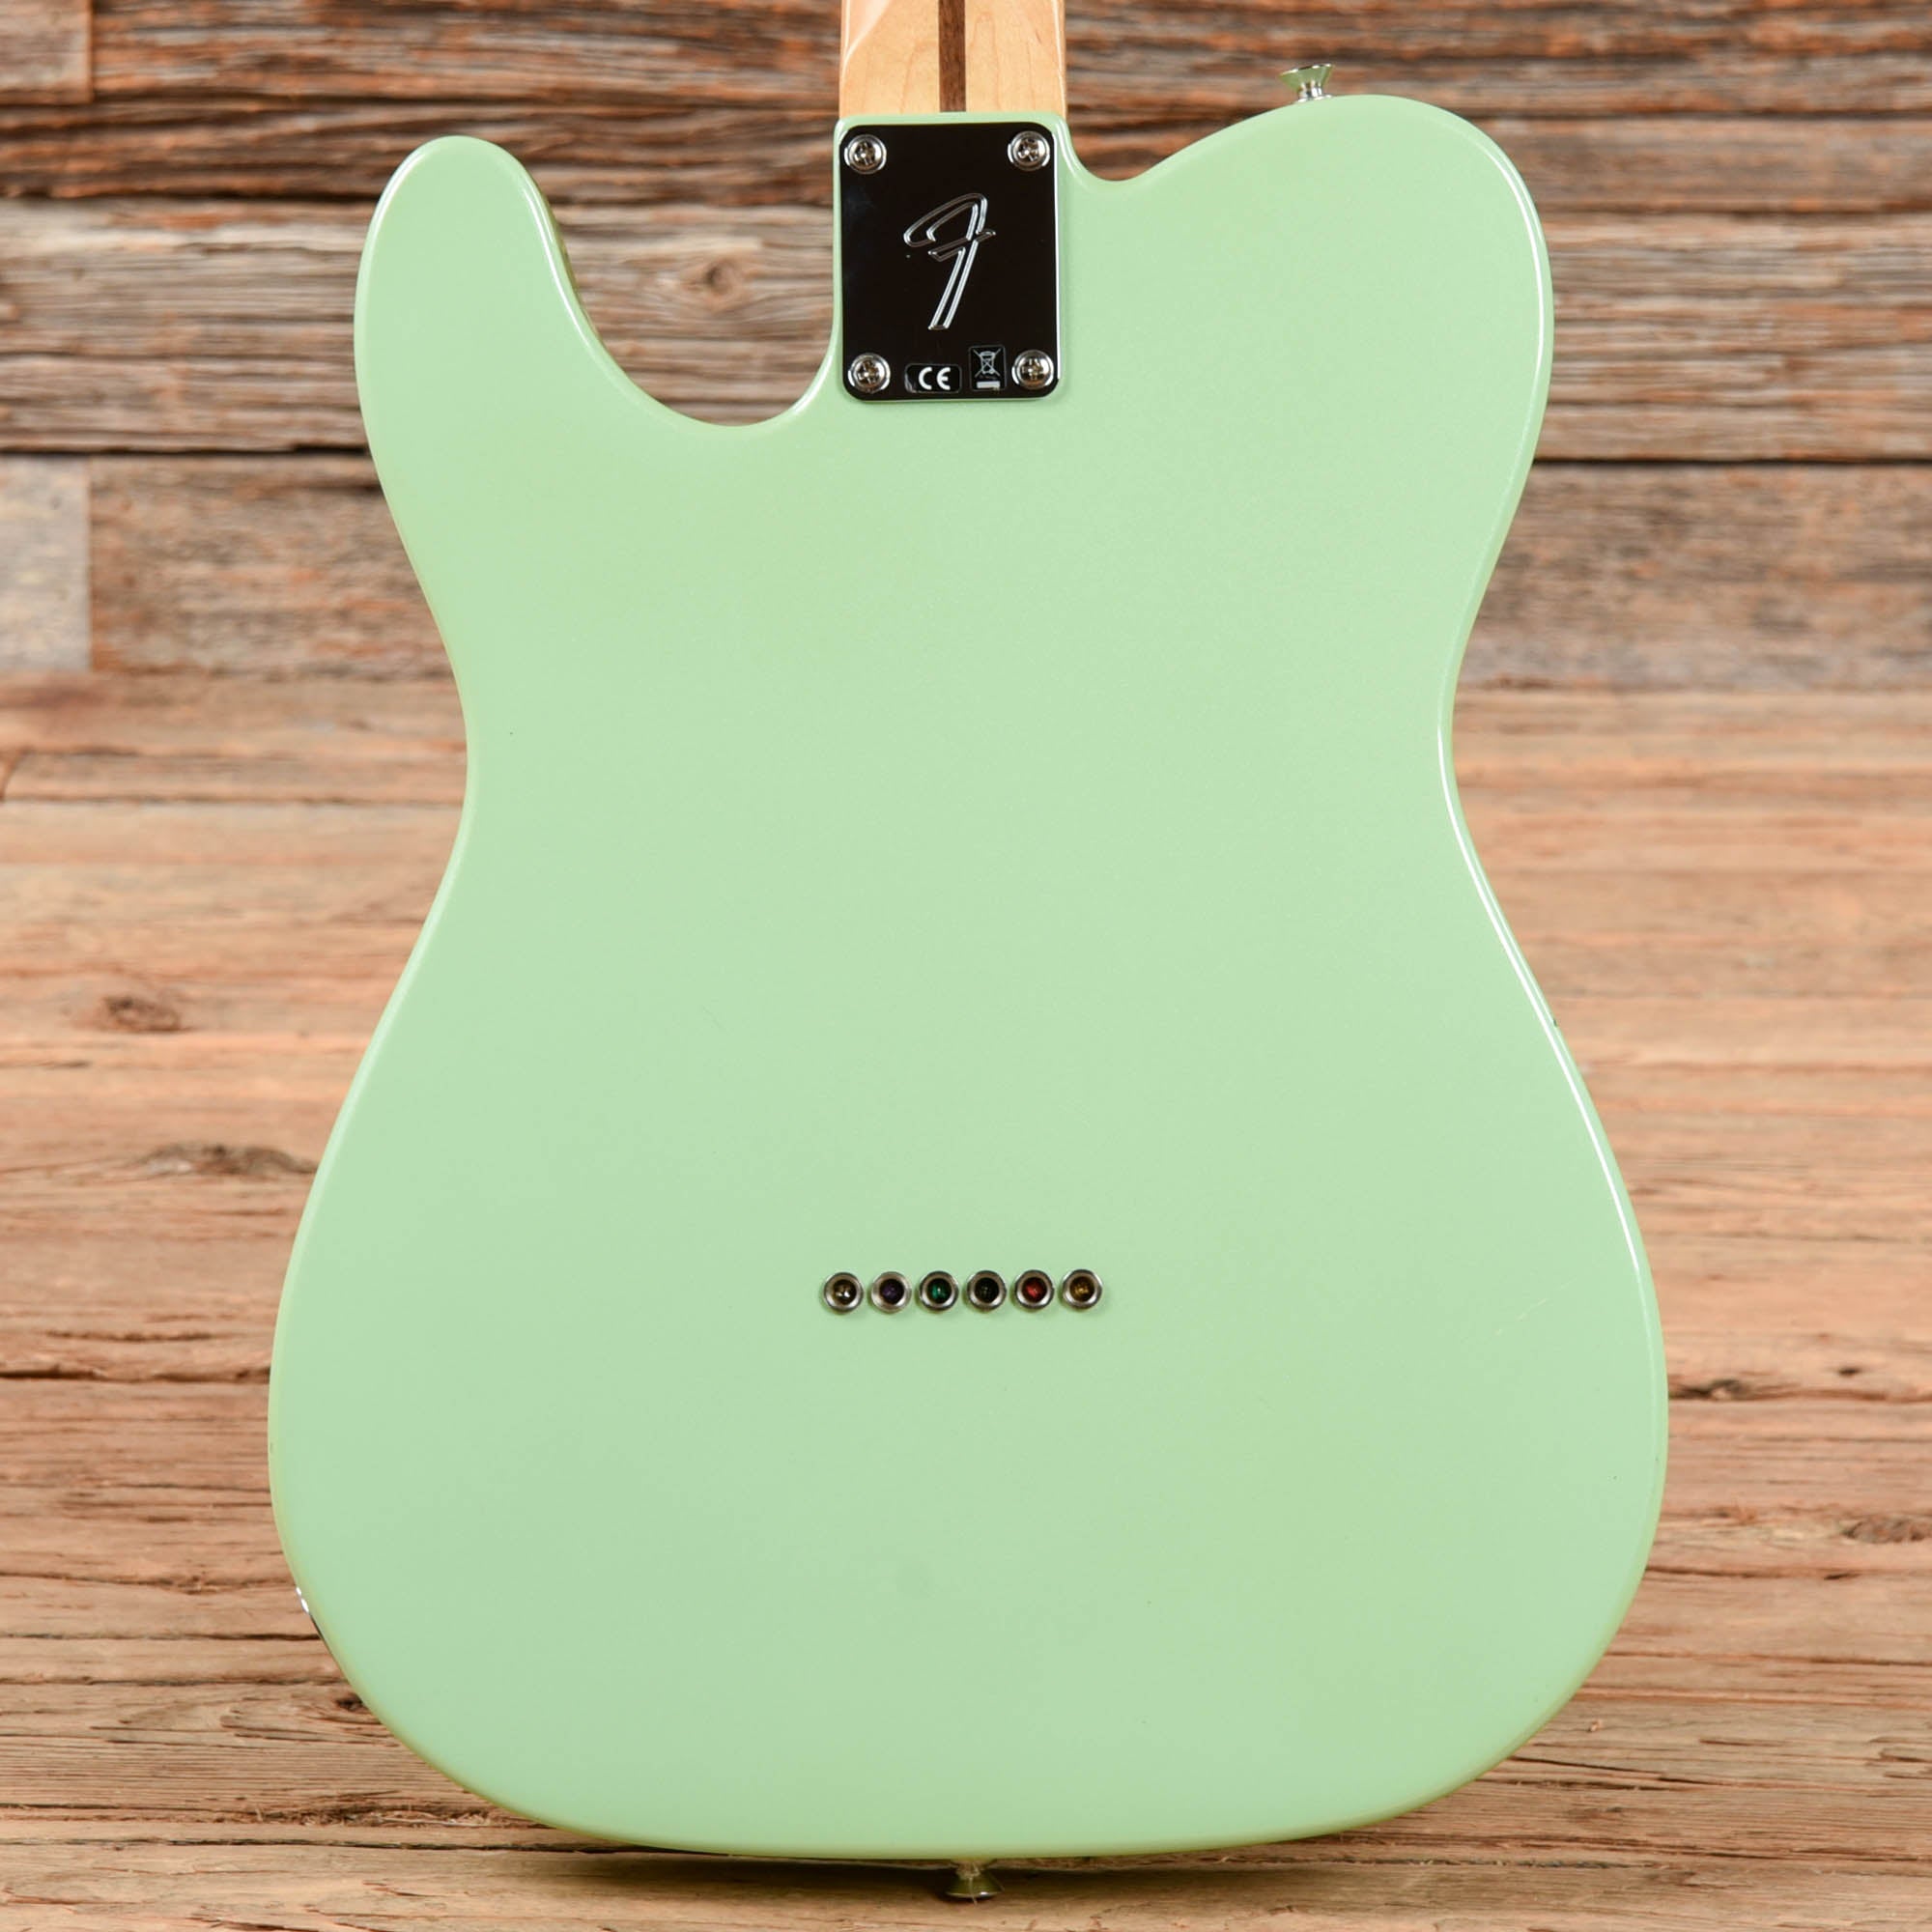 Fender Limited Edition Player Telecaster Surf Pearl 2020